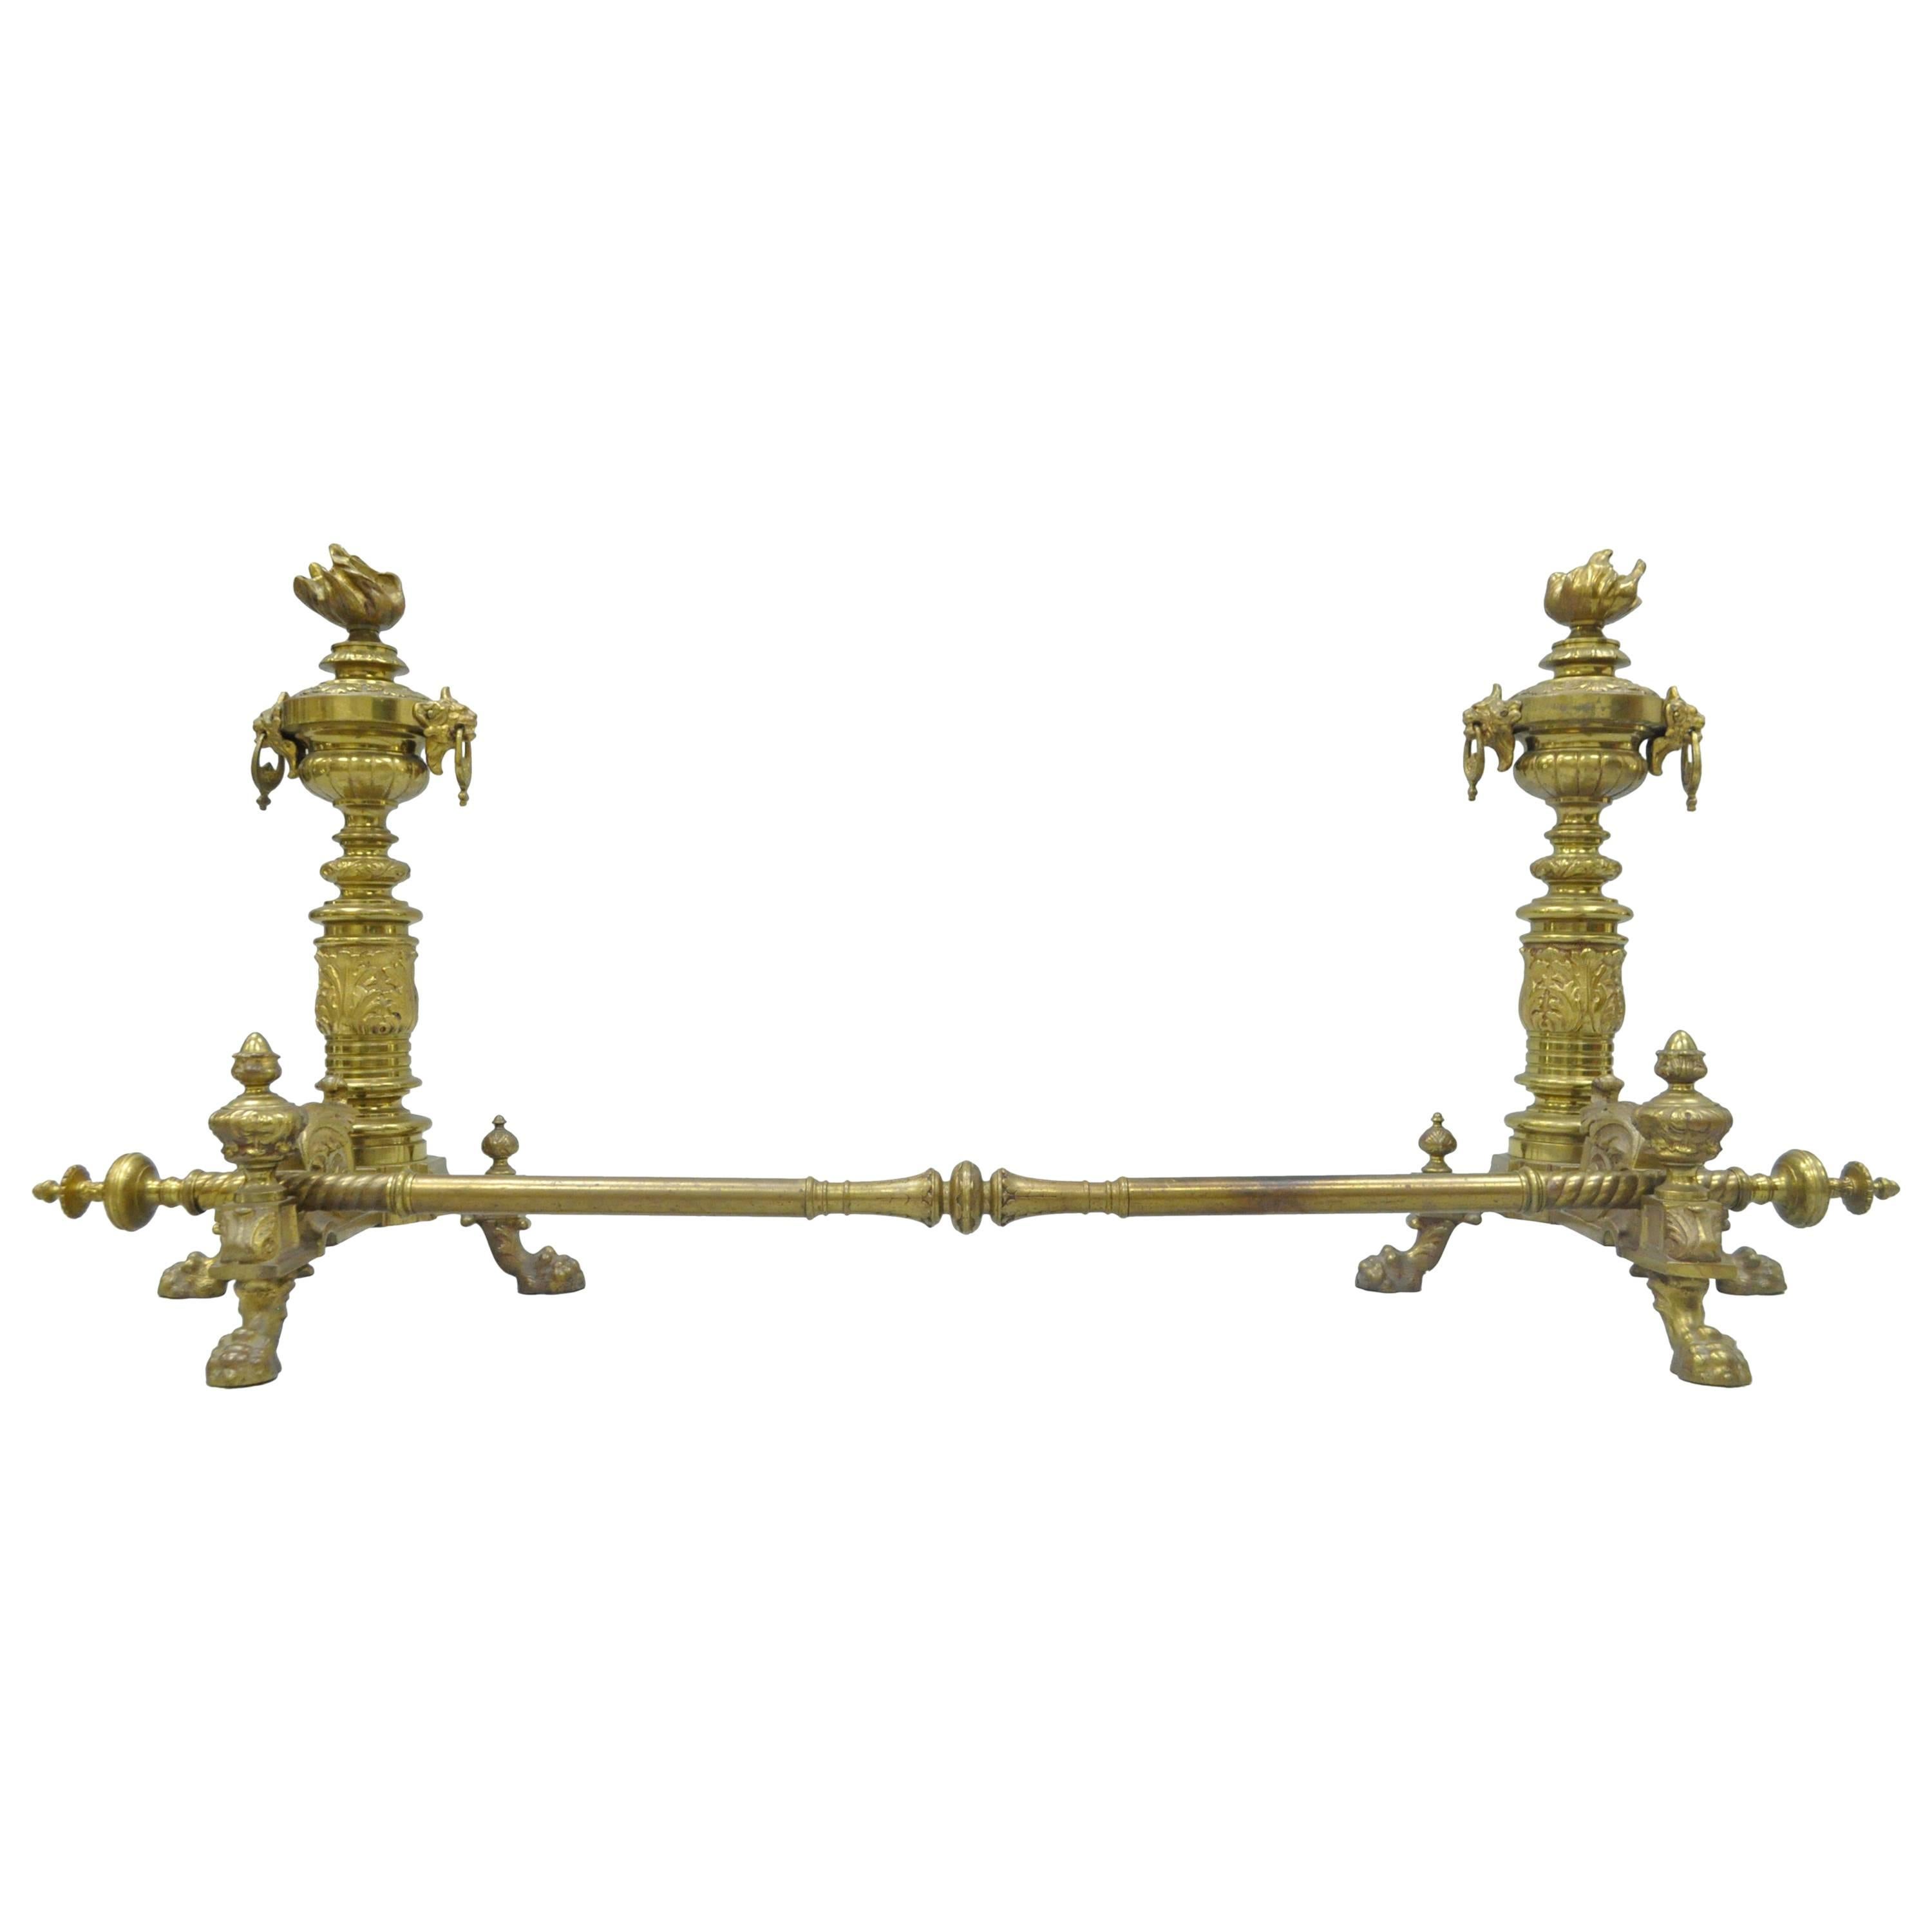 Pair of 19th C. French Empire Neoclassical Flame & Lion Brass Paw Andirons & Bar For Sale